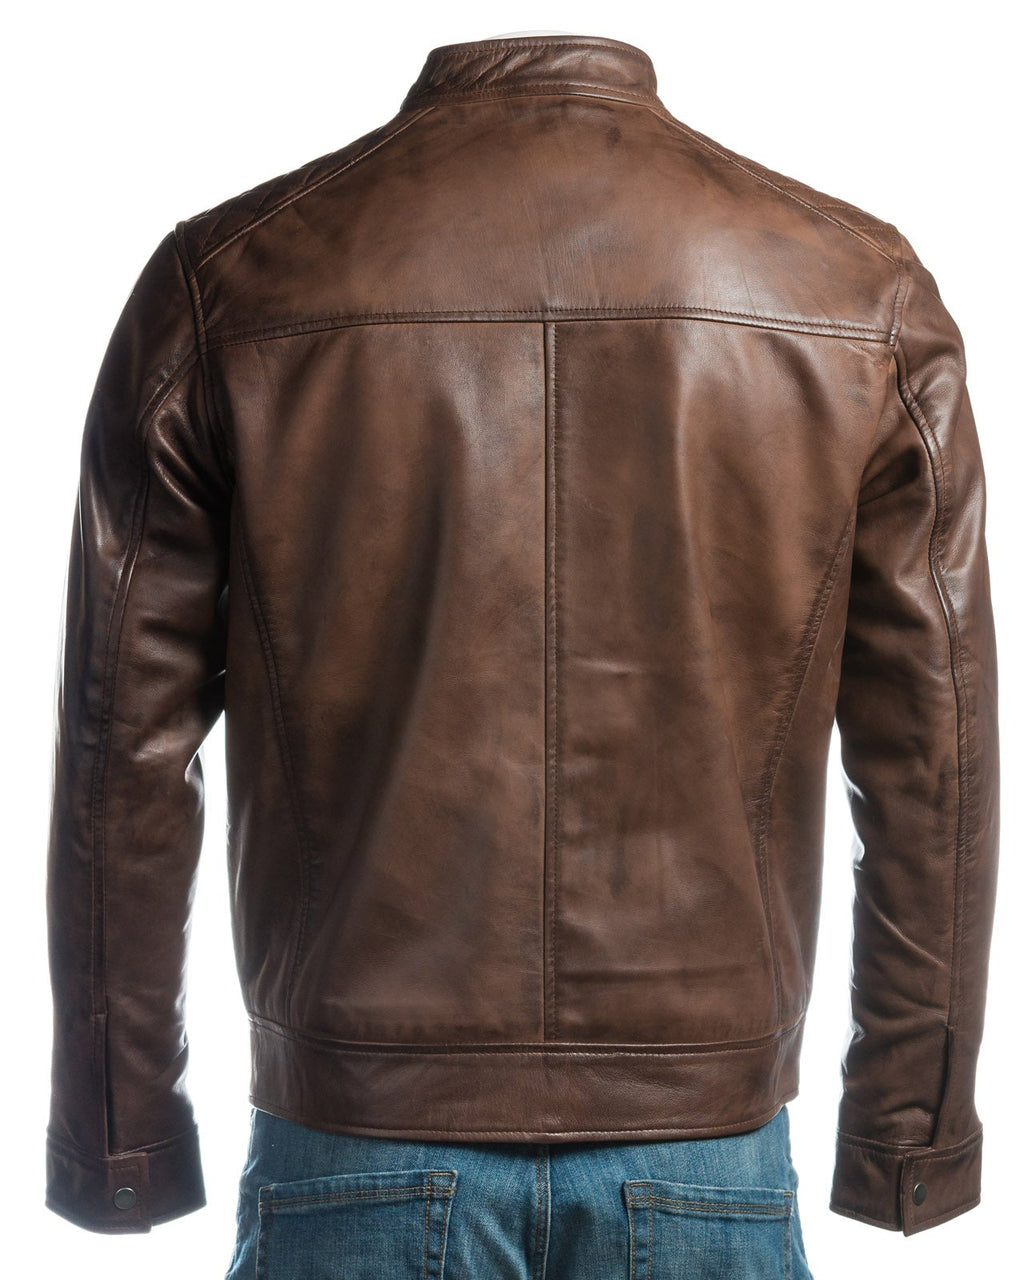 Men's Brown Slim Fit Racer Style Leather Jacket With Shoulder Detail: Silvano